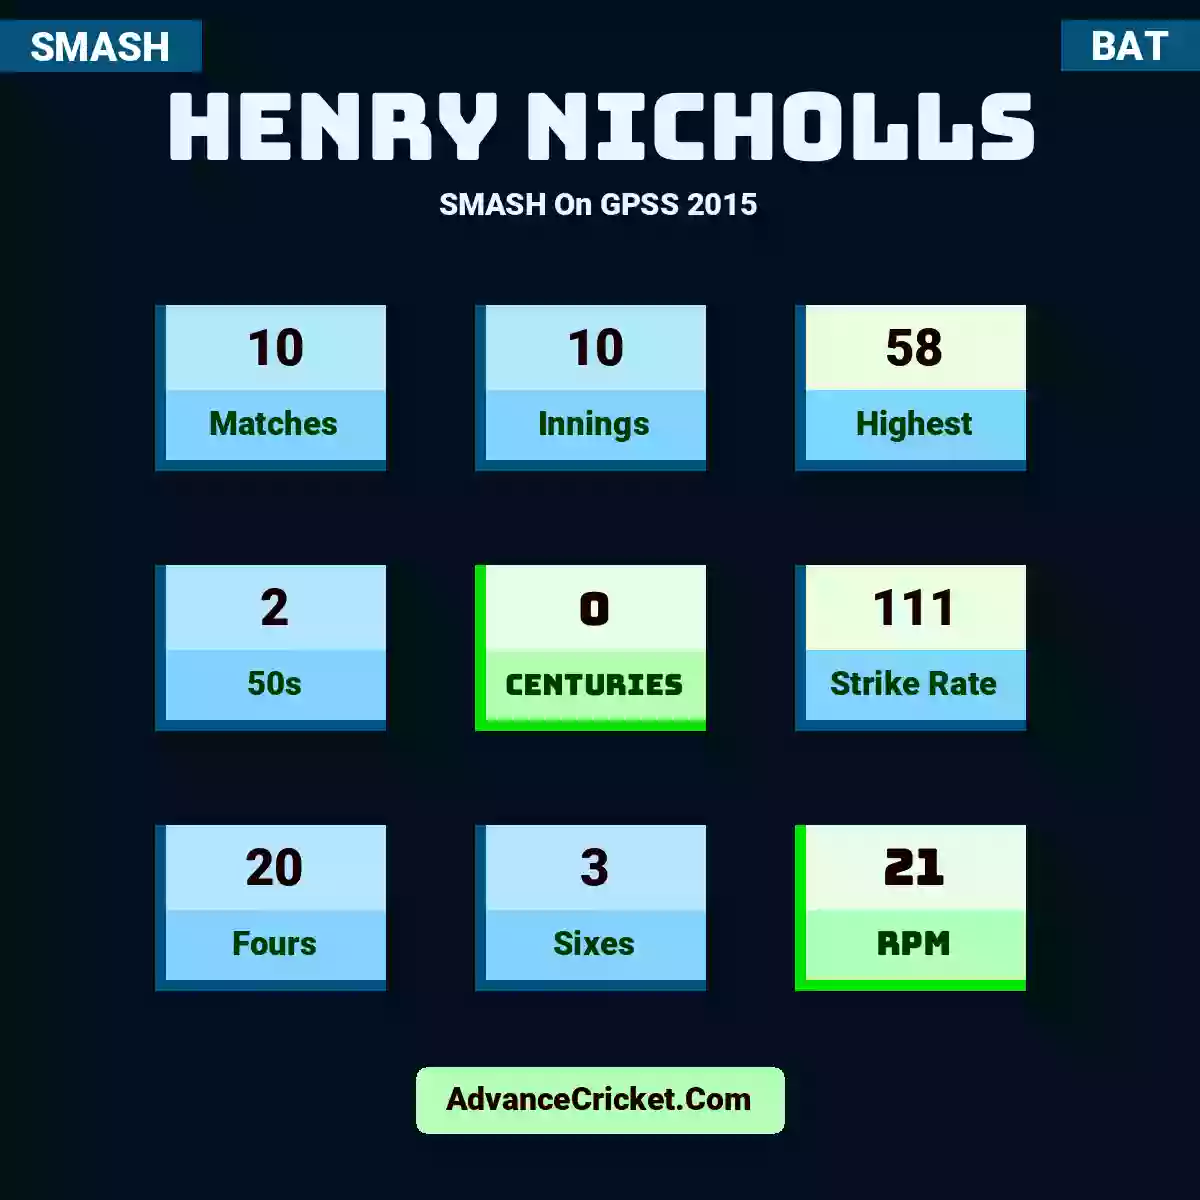 Henry Nicholls SMASH  On GPSS 2015, Henry Nicholls played 10 matches, scored 58 runs as highest, 2 half-centuries, and 0 centuries, with a strike rate of 111. H.Nicholls hit 20 fours and 3 sixes, with an RPM of 21.